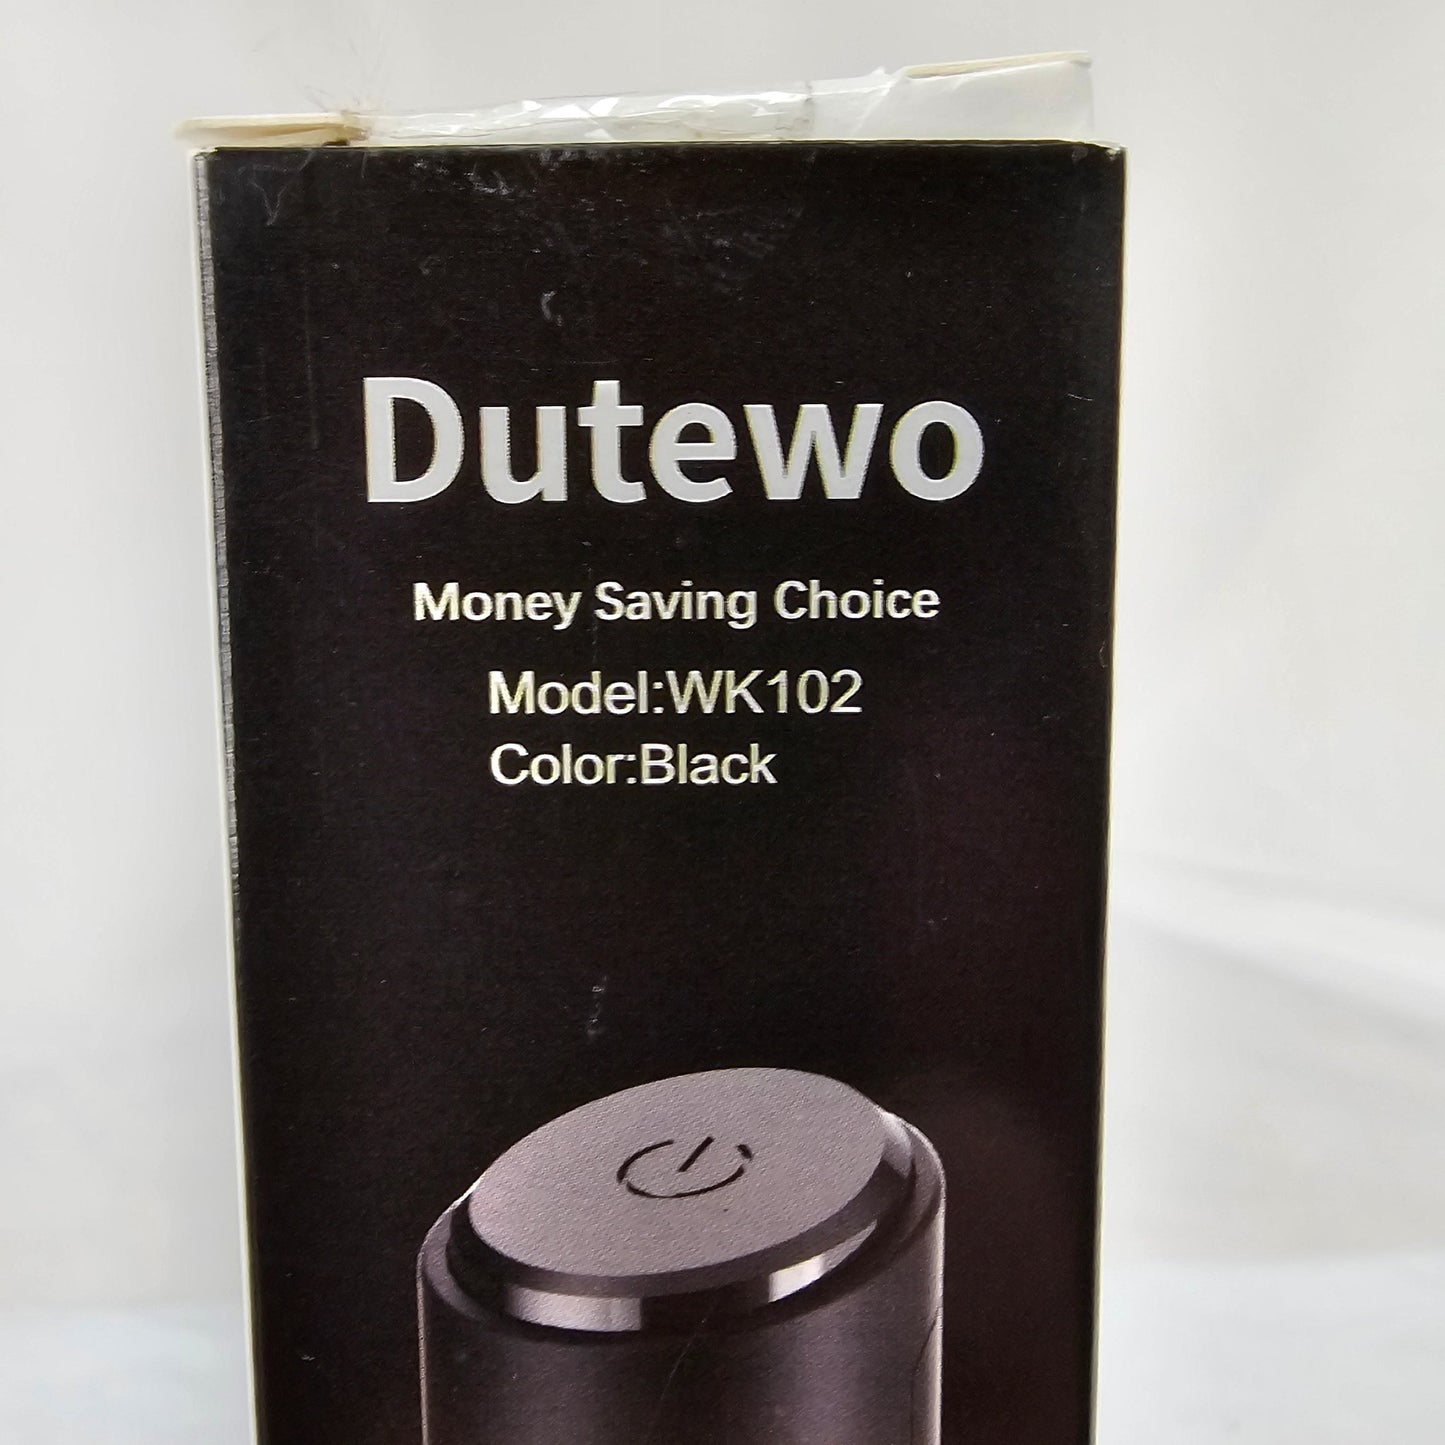 Milk Frother Dutewo WK102 - DQ Distribution